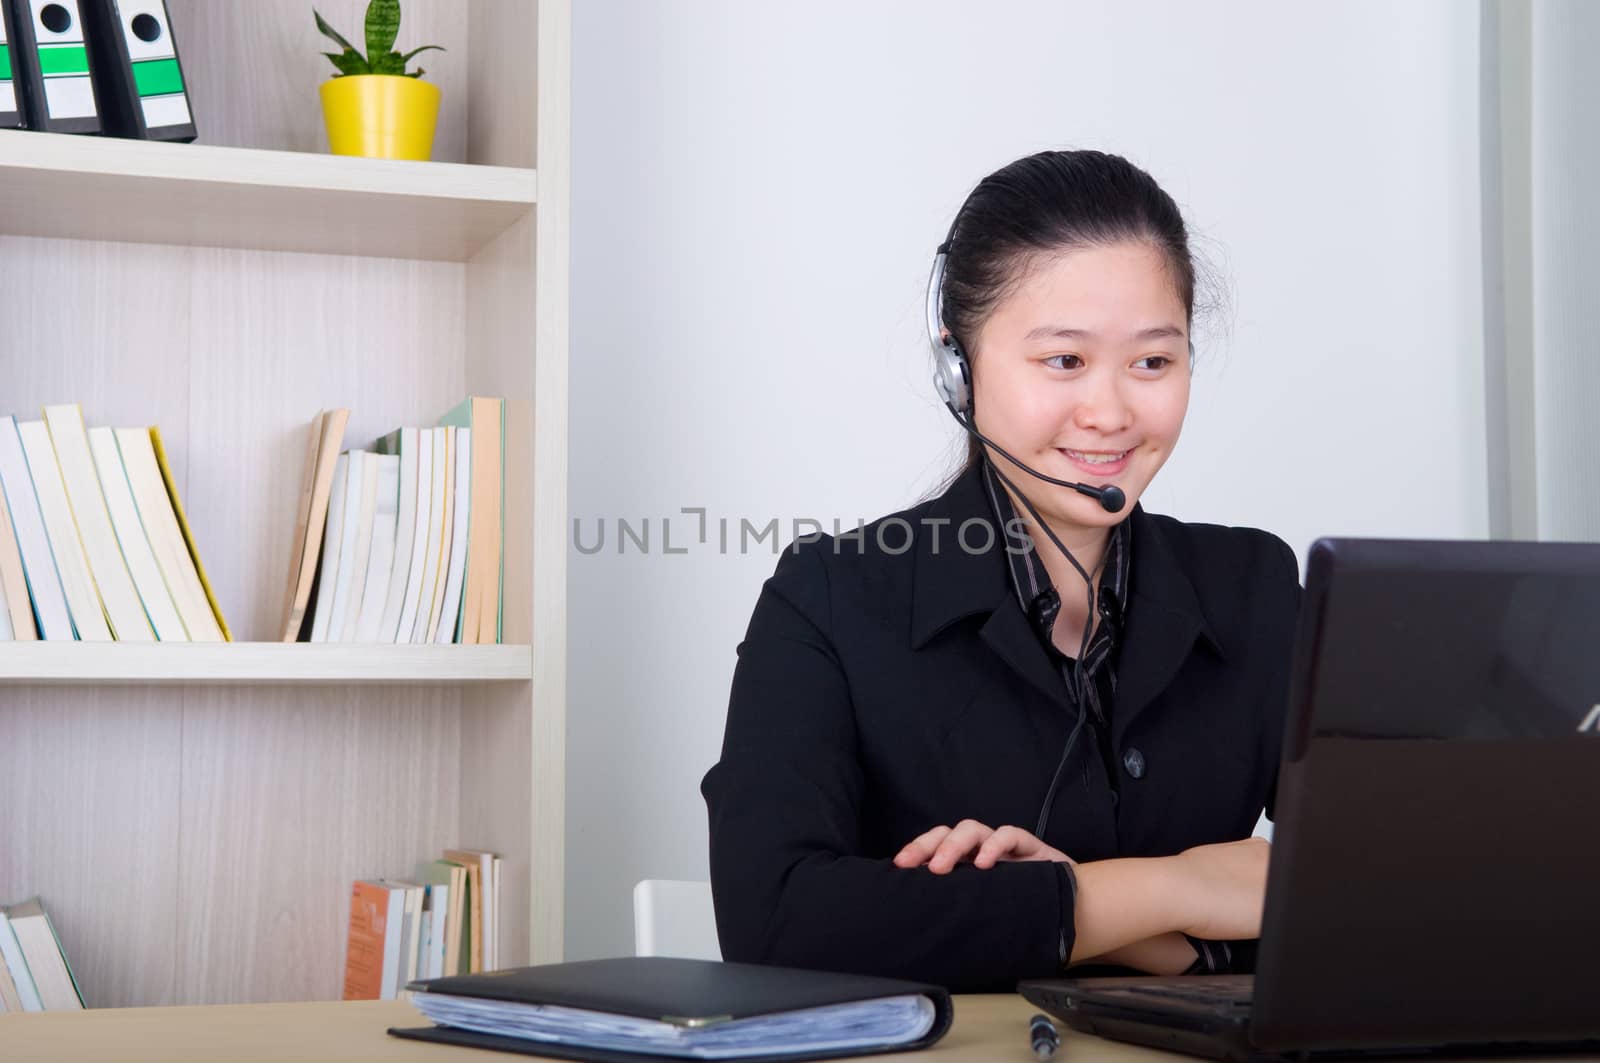 Beautiful asia young business woman with headset and laktop